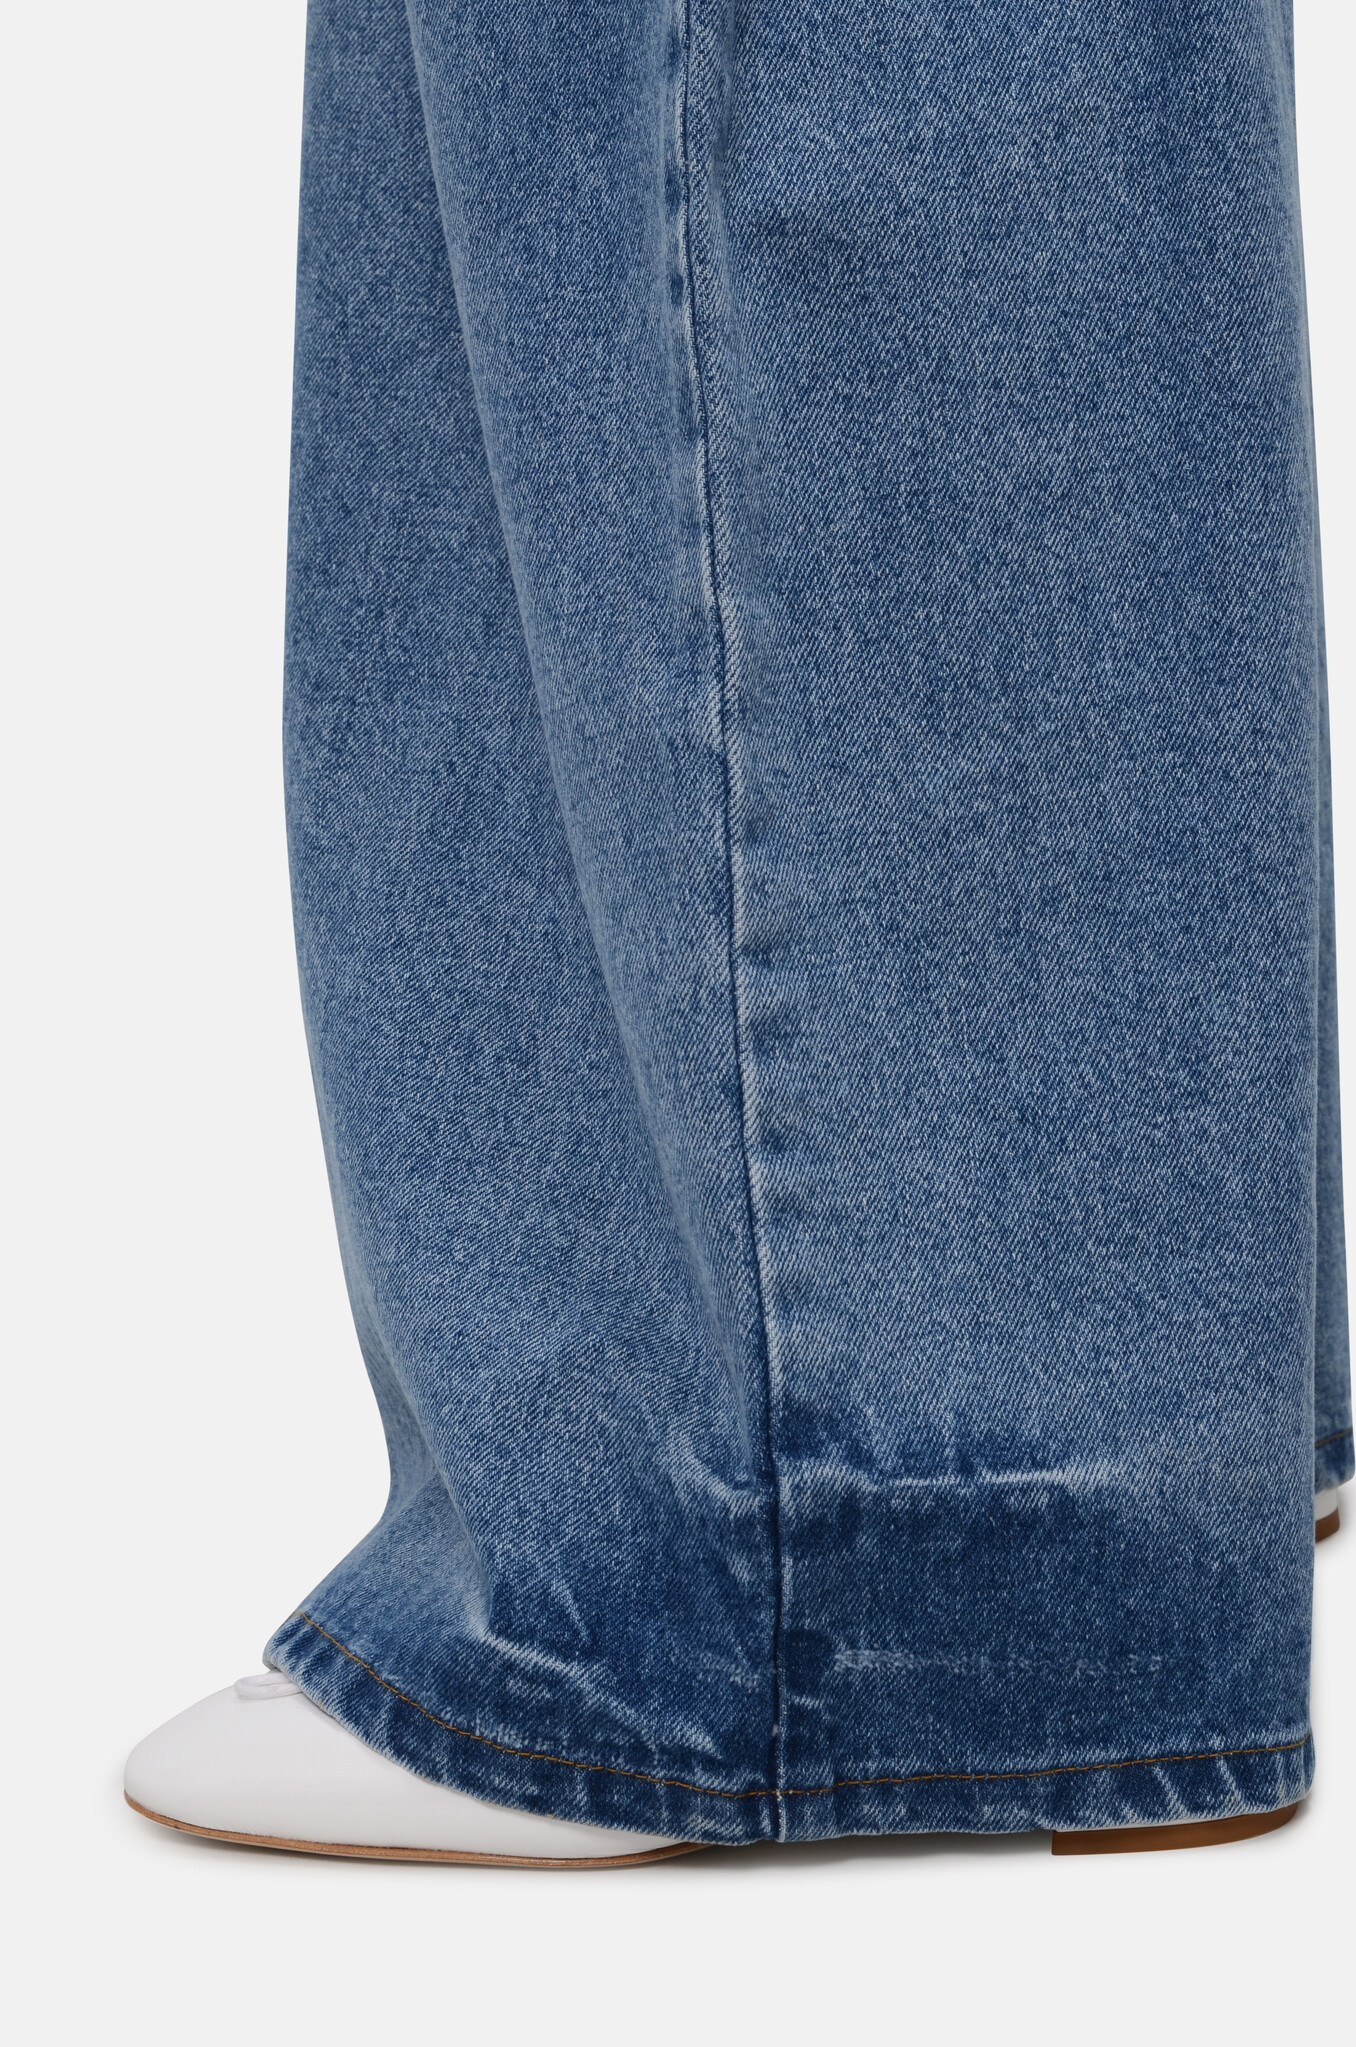 Double Tucked Jeans in Smoke Blue-5